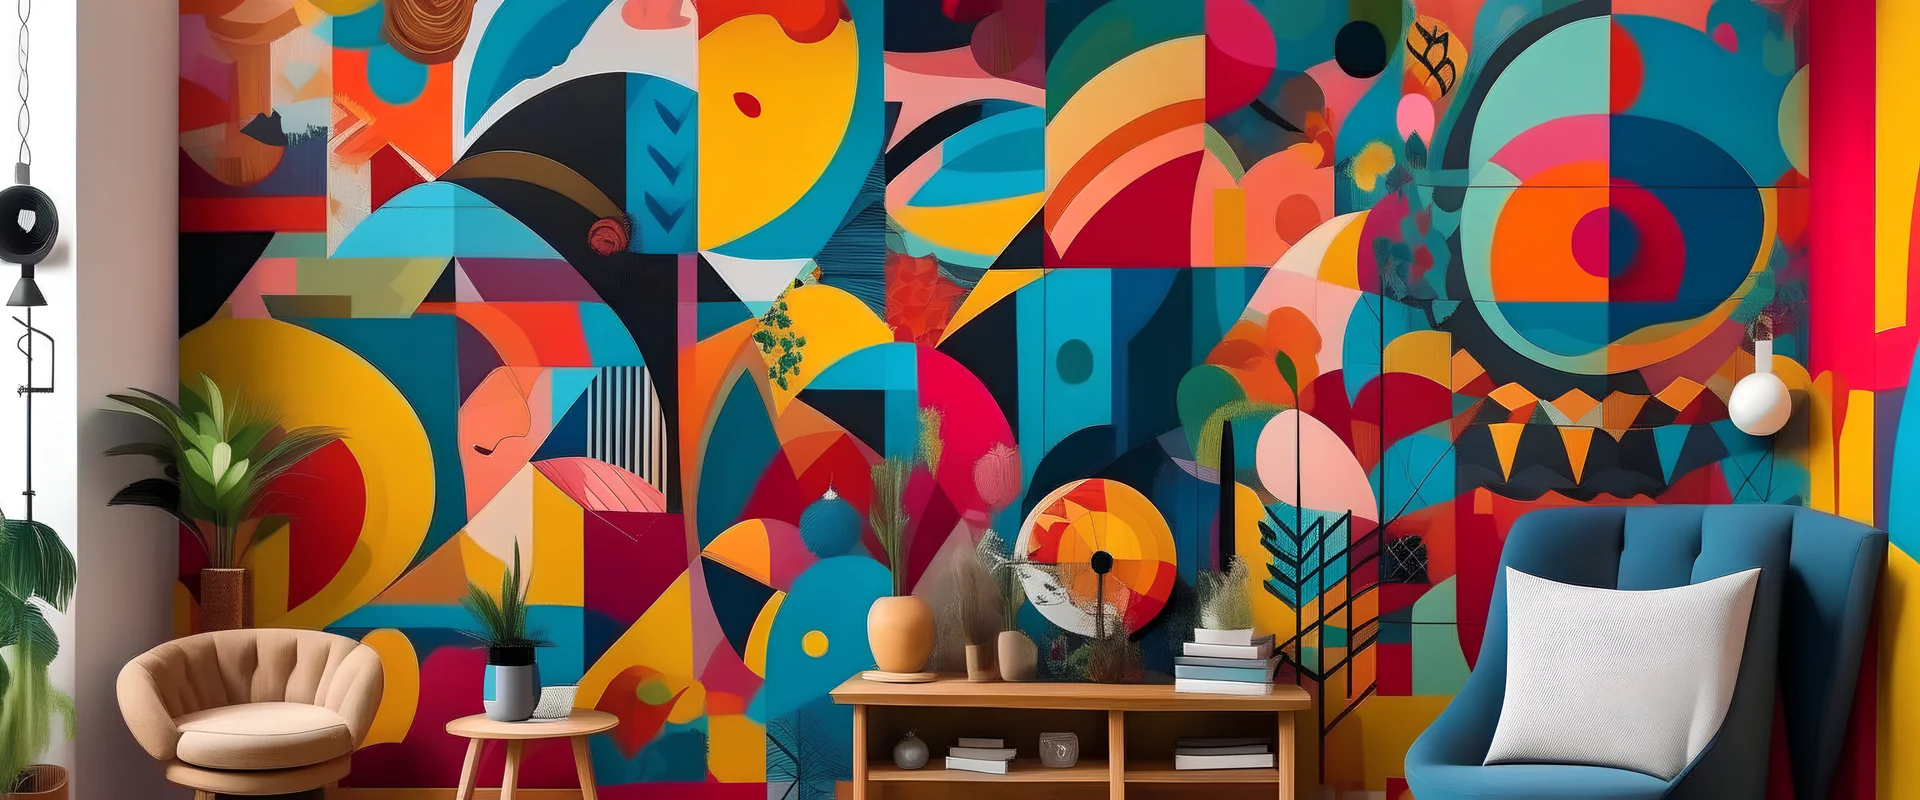 Generate a mural resembling a colorful collage, featuring an eclectic mix of shapes that come together to create a visually stimulating composition.